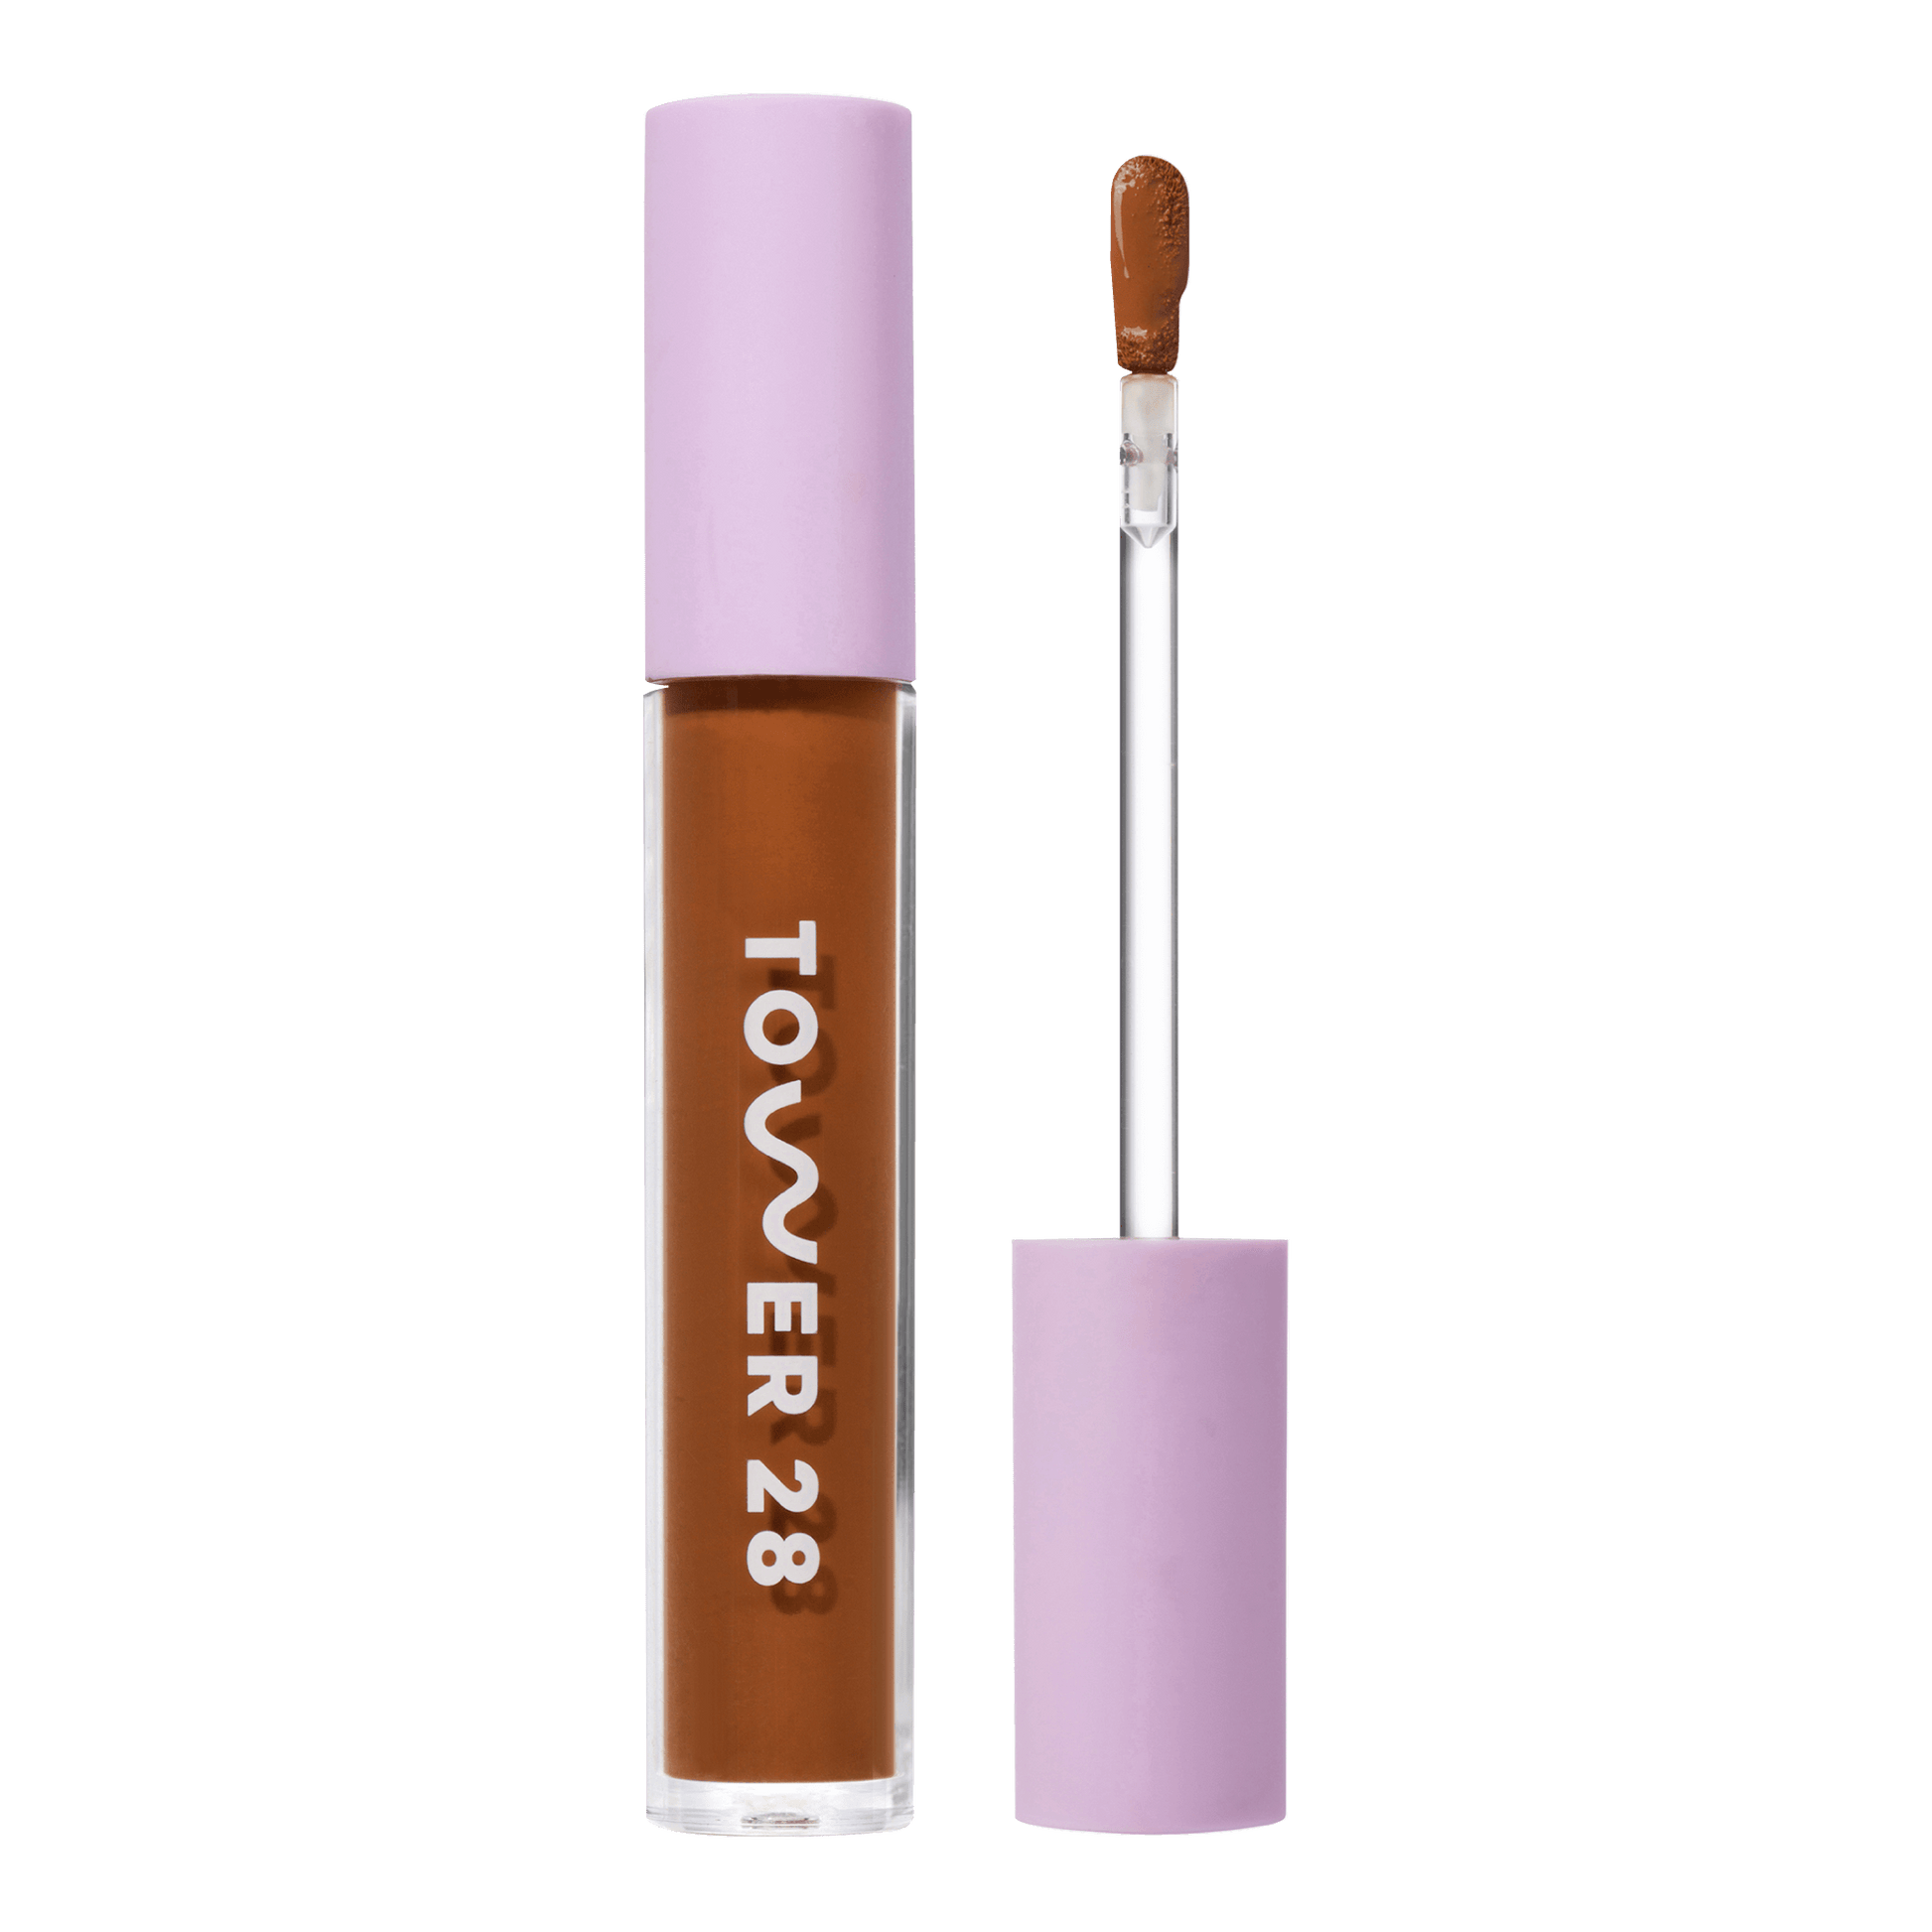 Tower 28 Beauty Swipe Serum Concealer in the shade 18.0 SGV